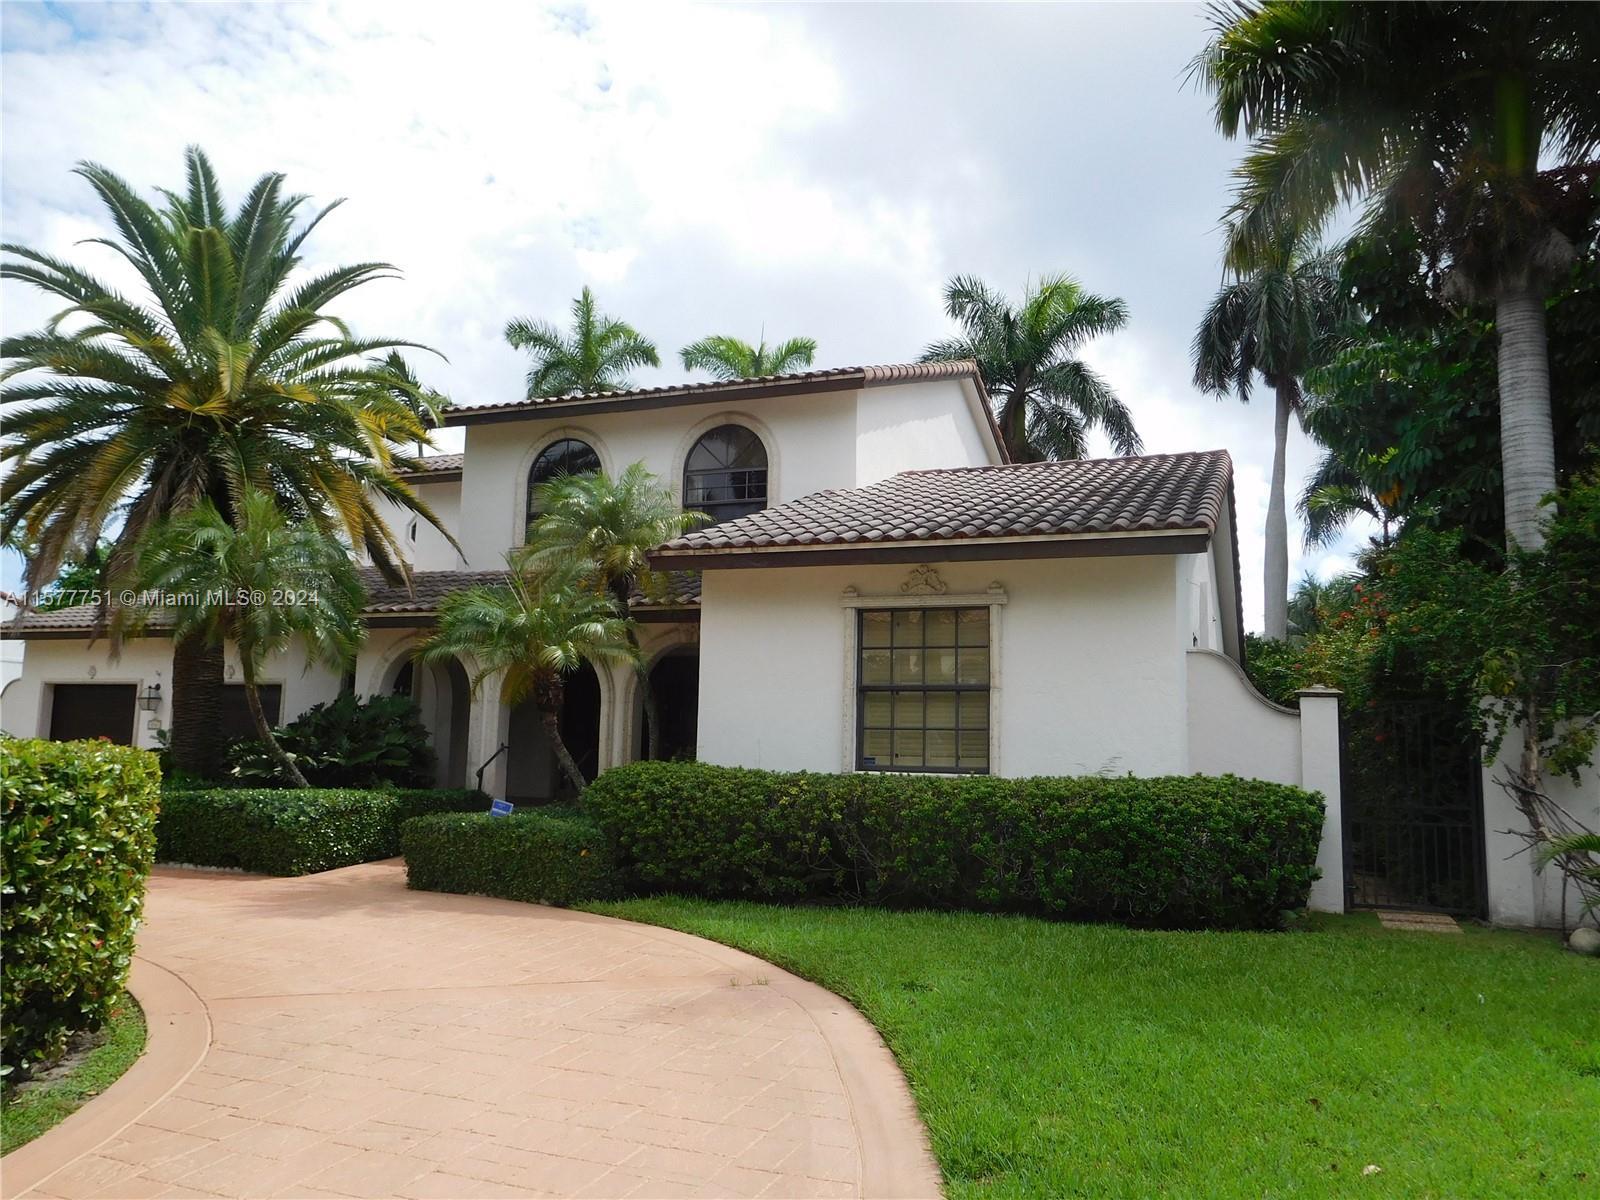 LOCATION, LOCATION, LOCATION !! 2-story Spanish-style charmer in Ft. Lauderdale's top location sitti